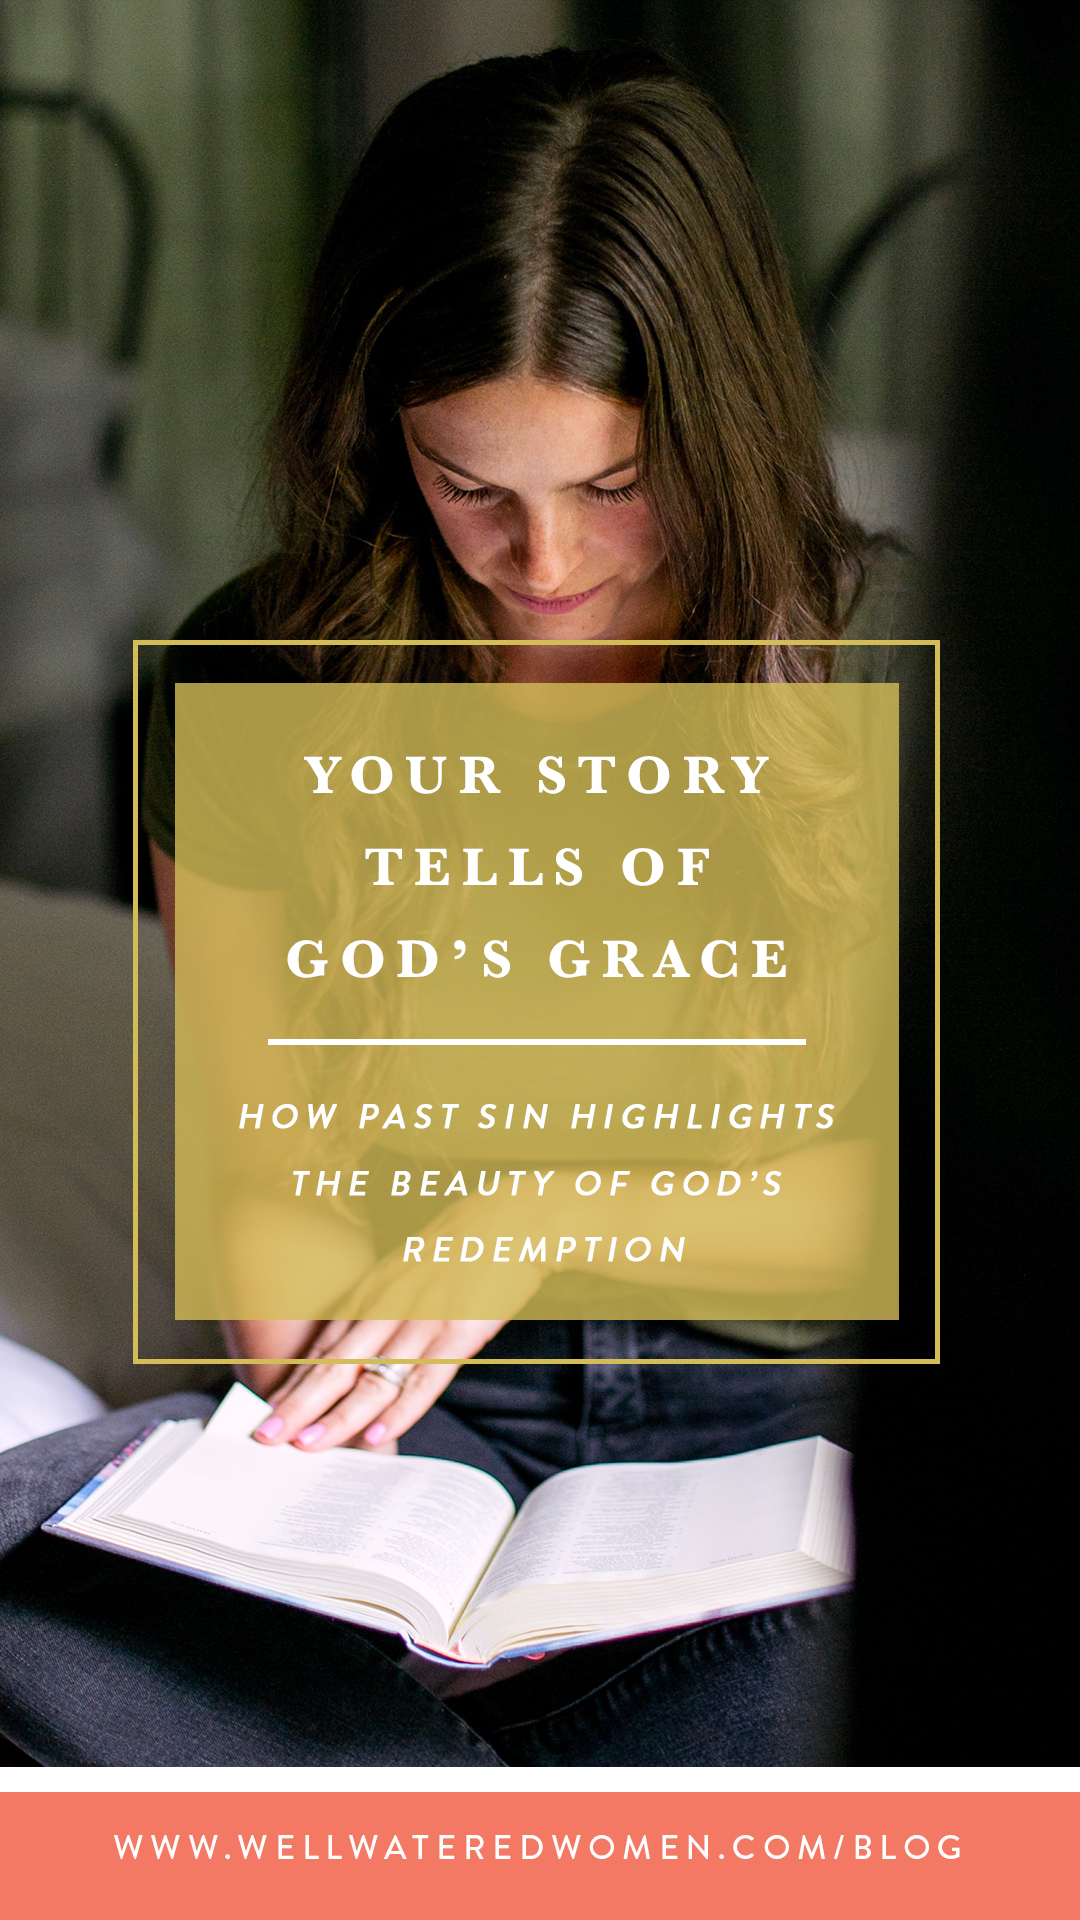 Well-Watered Women Blog-Your Story Tells of God's Grace